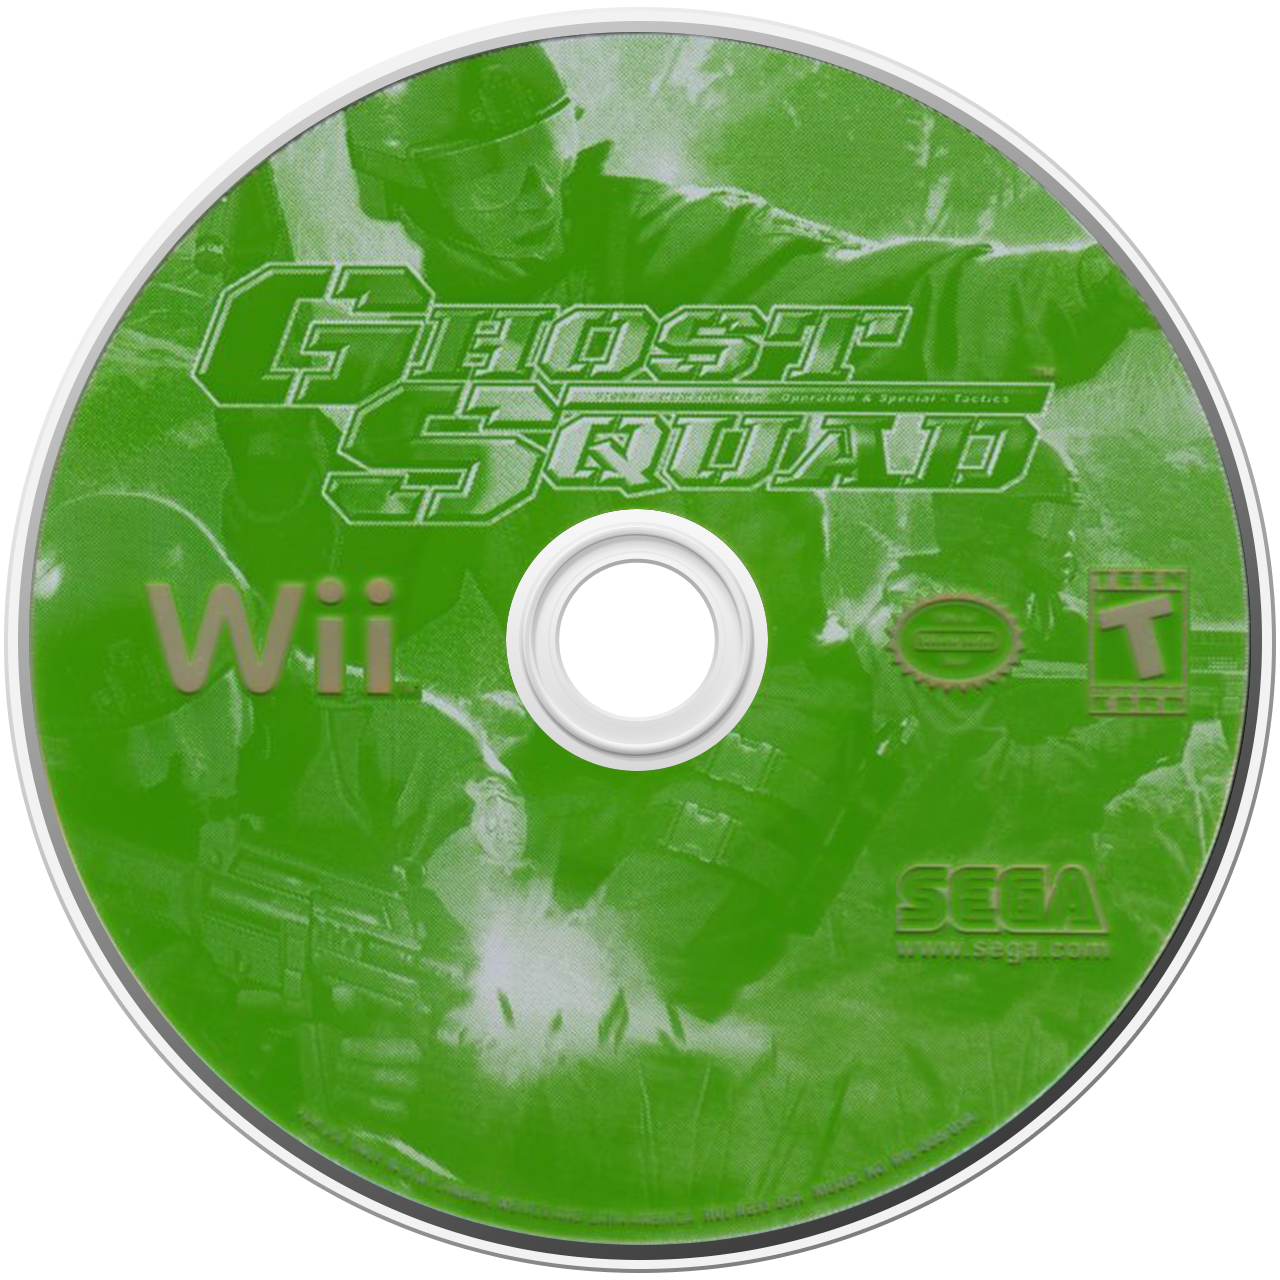 download ghost squad game for wii with homebrew